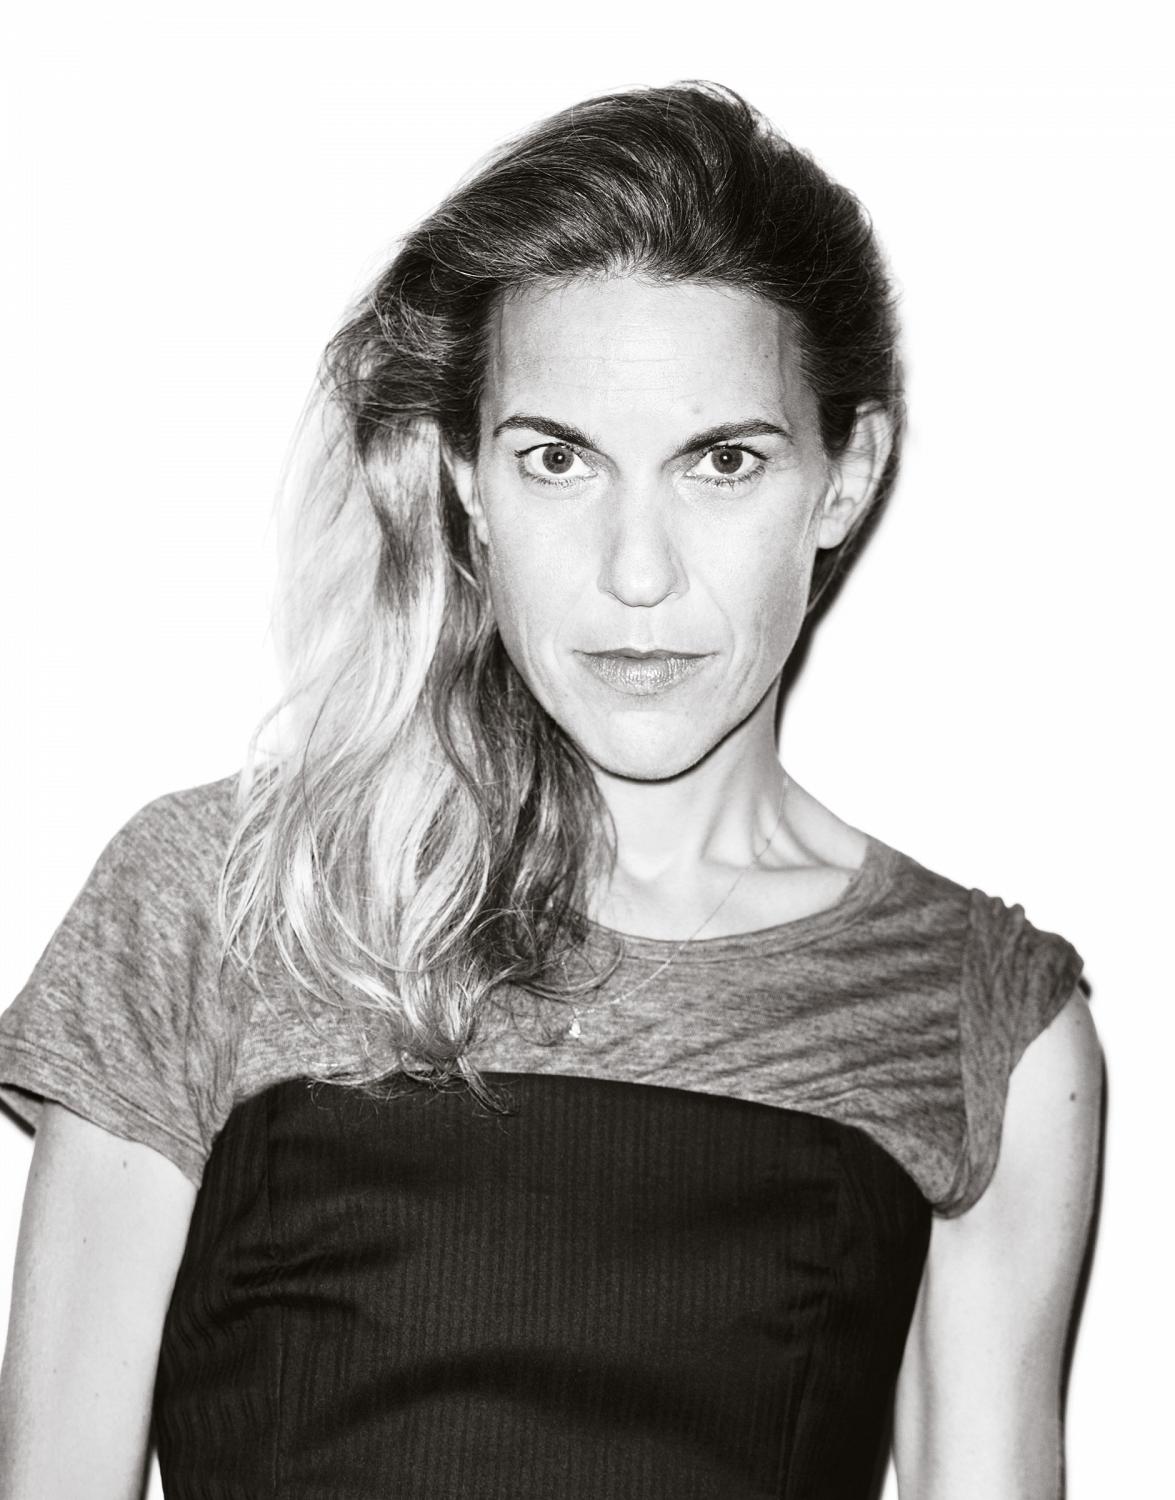 Isabel Marant Could Make Bathing Suit Dressing the Next Big Thing